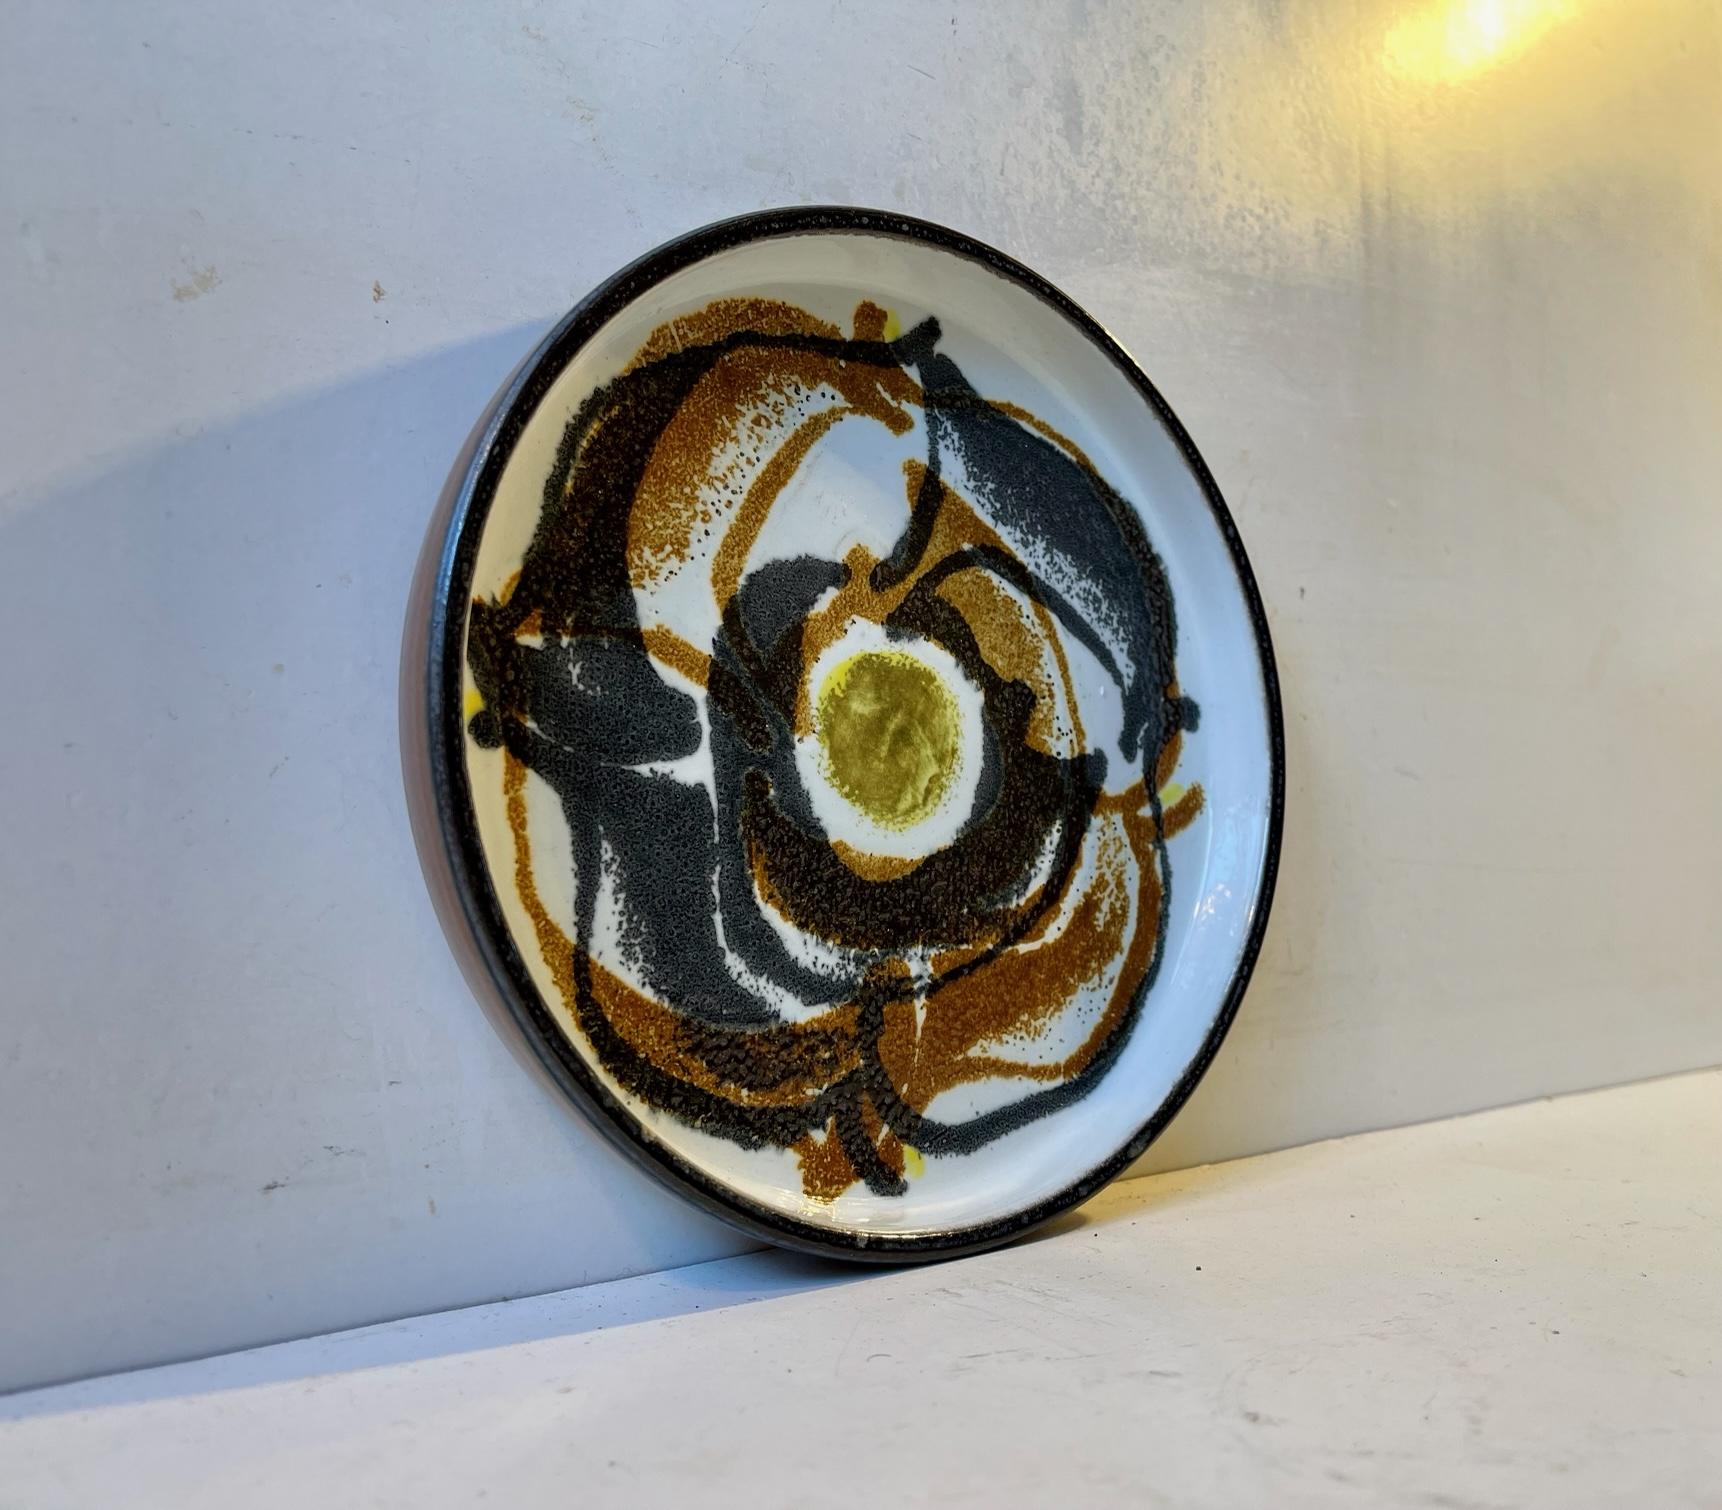 A fajance bowl with abstract - modernistic glazed motif in contrasting glazes. Both designed by the danish ceramist Ellen Malmer (EM) and manufactured by Royal Copenhagen during the 1970s. Its fully signed, numbered and marked to the base.